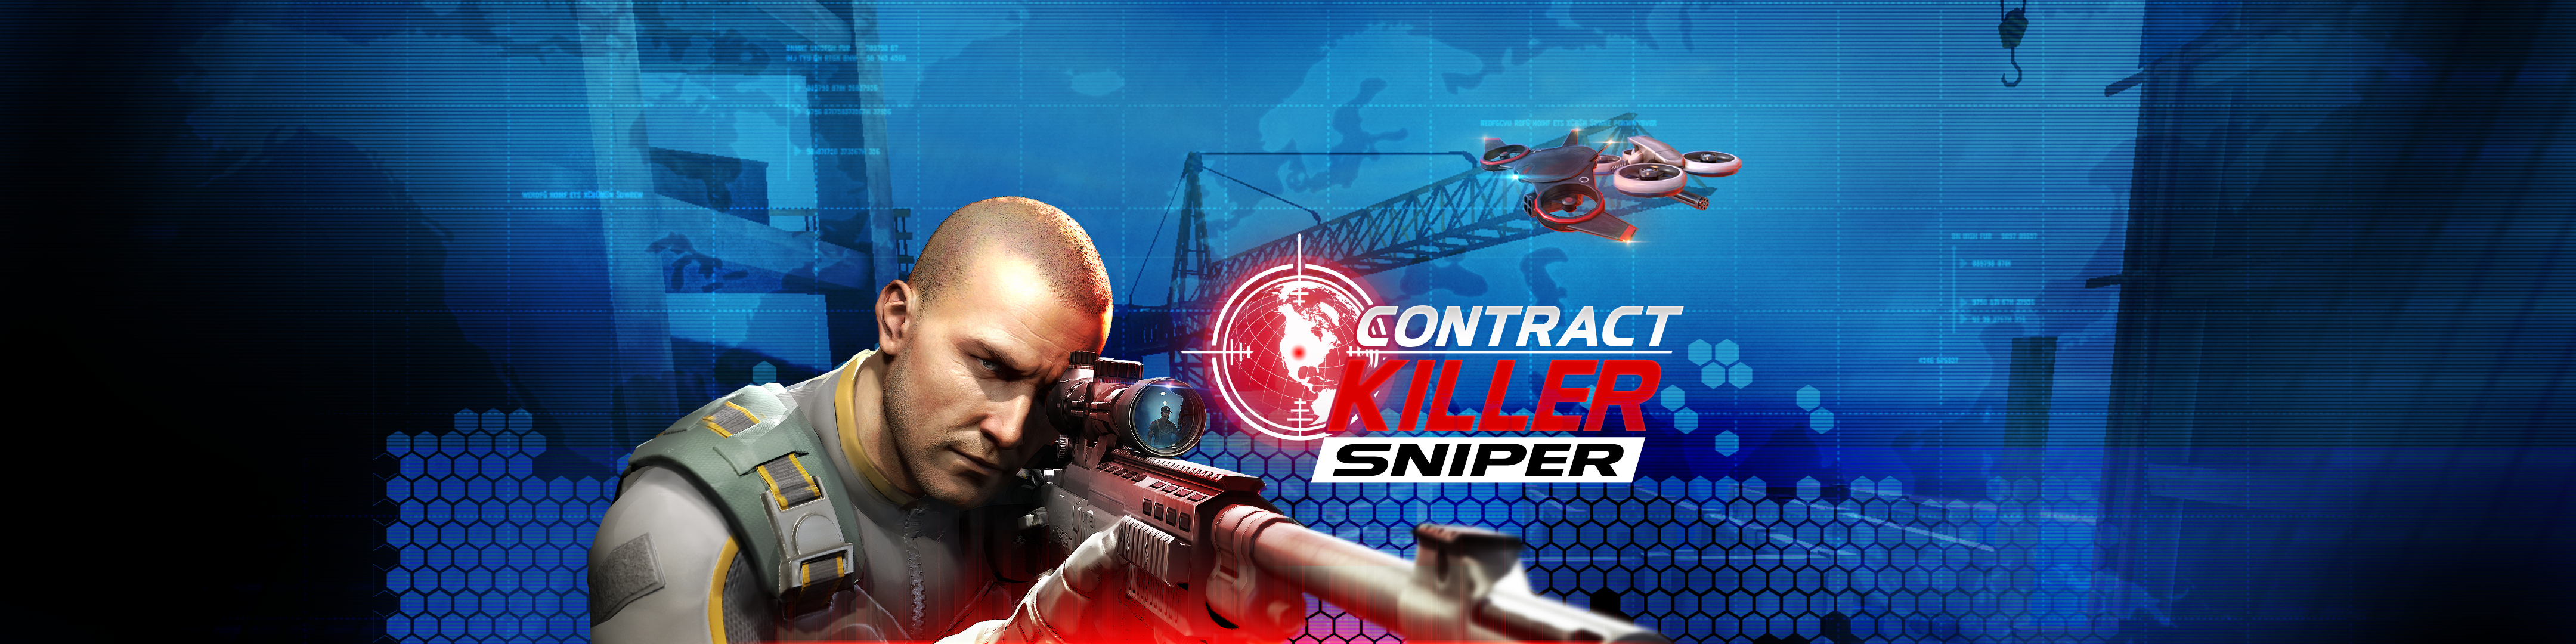 contract killer sniper not loading